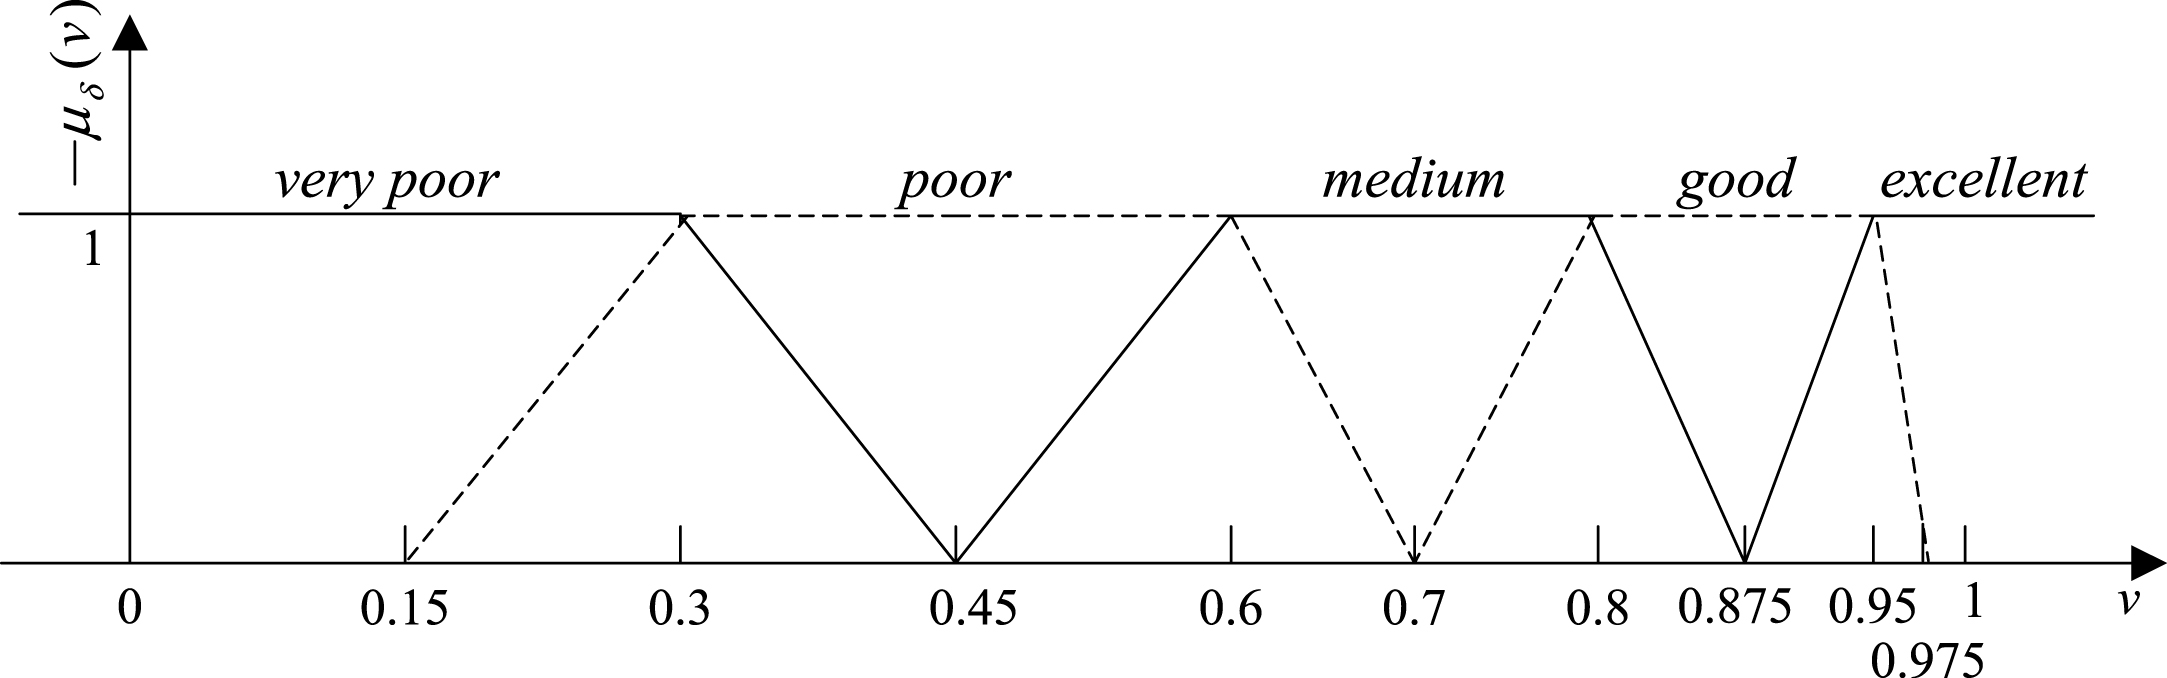 The fuzzy membership functions of task success and task time (converted value). v is a measure value for task success or converted value for task time, μδ(v), ranges from 0 to 1, means the value’s corresponding membership degree to very poor, poor, medium, good, and excellent, respectively. The ranges for v in the interval [0, 1], for the corresponding threshold parameters were: 0, 0.3, 0.6, 0.8, 0.95, and 1 which are the value of v1, v2, v3, v4, and v5 respectively. 0.15, 0.45, 0.7, 0.875, and 0.975 are the value of c1, c2, c3, c4, and c5, which represent the middle values of the intervals (v1, v2), (v2, v3), (v3, v4), (v4, v5), and (v5, v6) respectively. In terms of task time, v values correspond to very poor singly and completely for v <0, and correspond to excellent singly and completely for 1 < v<2.